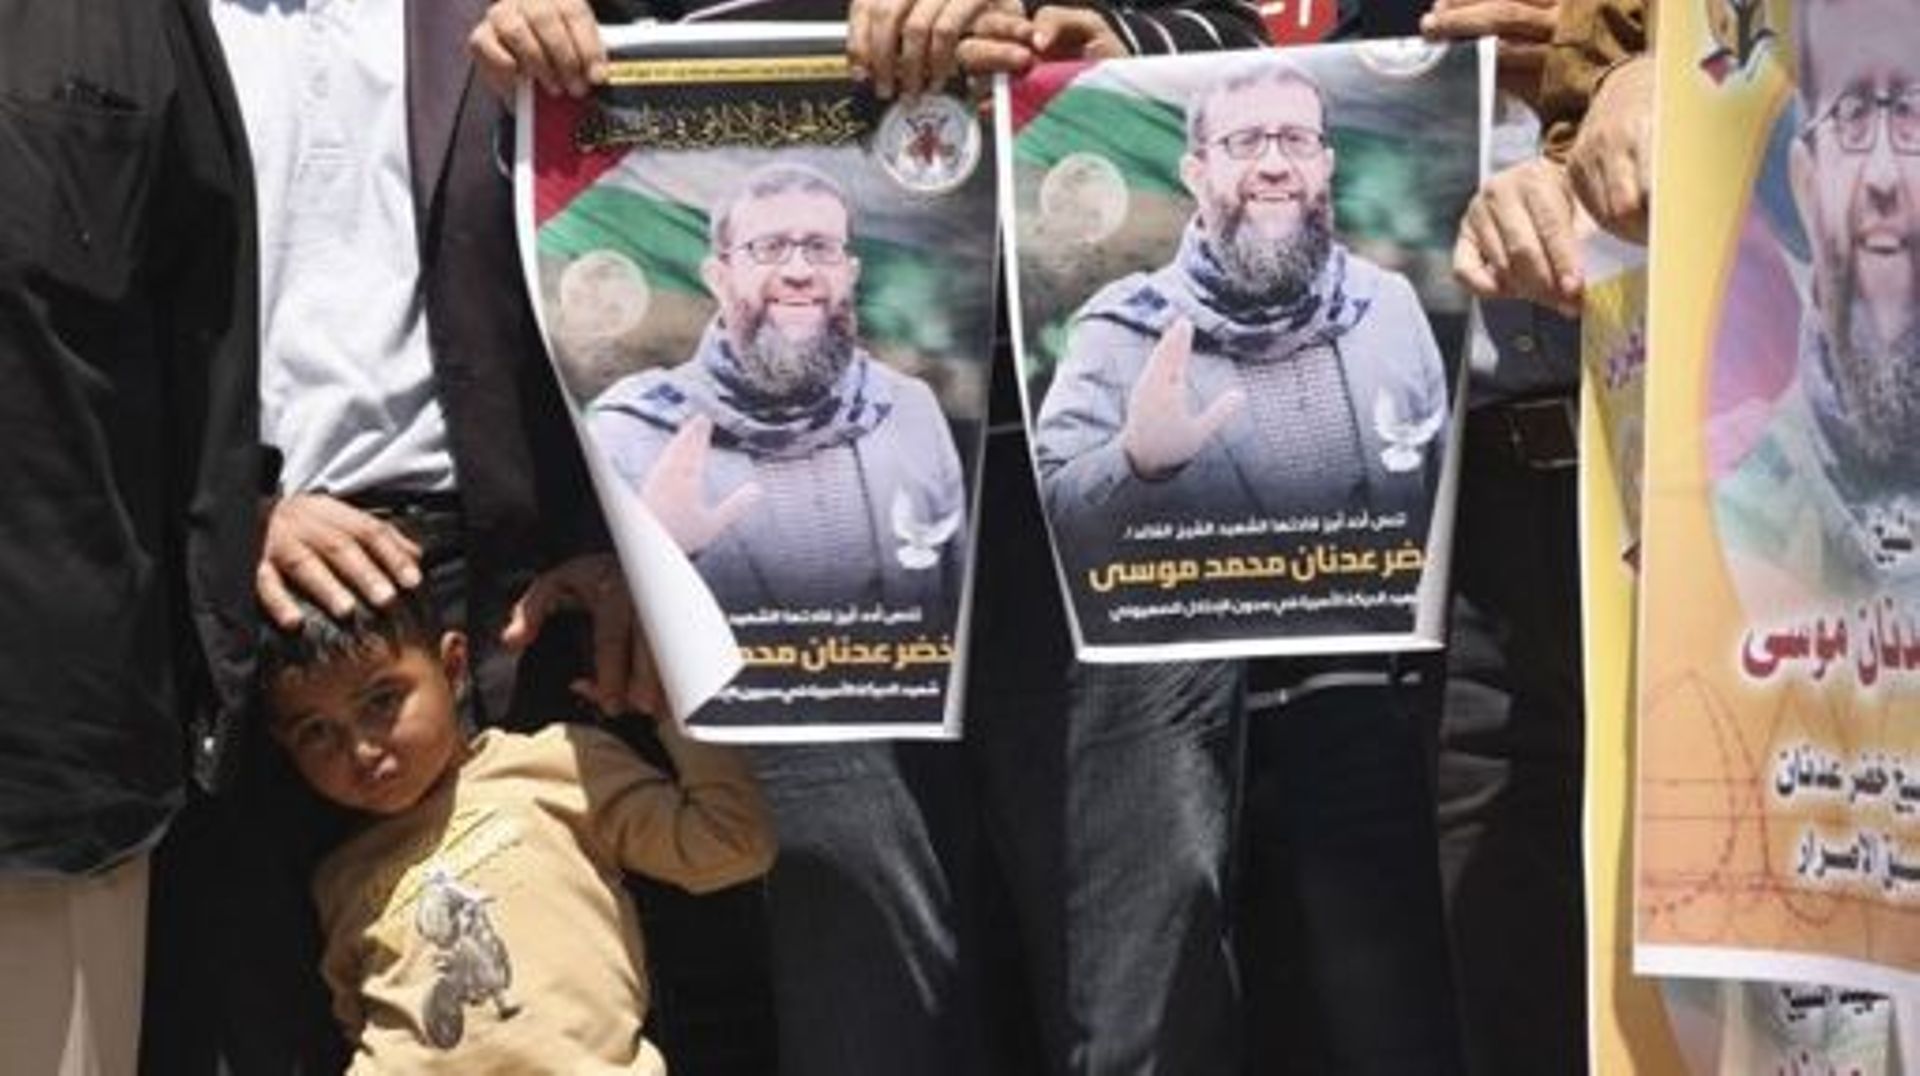 People hold portraits of Khader Adnan, a Palestinian Islamic Jihad militant who had been on hunger strike in prison for nearly three months, during a rally following the announcement of his death, on May 2, 2023, in Gaza City. Israel’s prison service anno